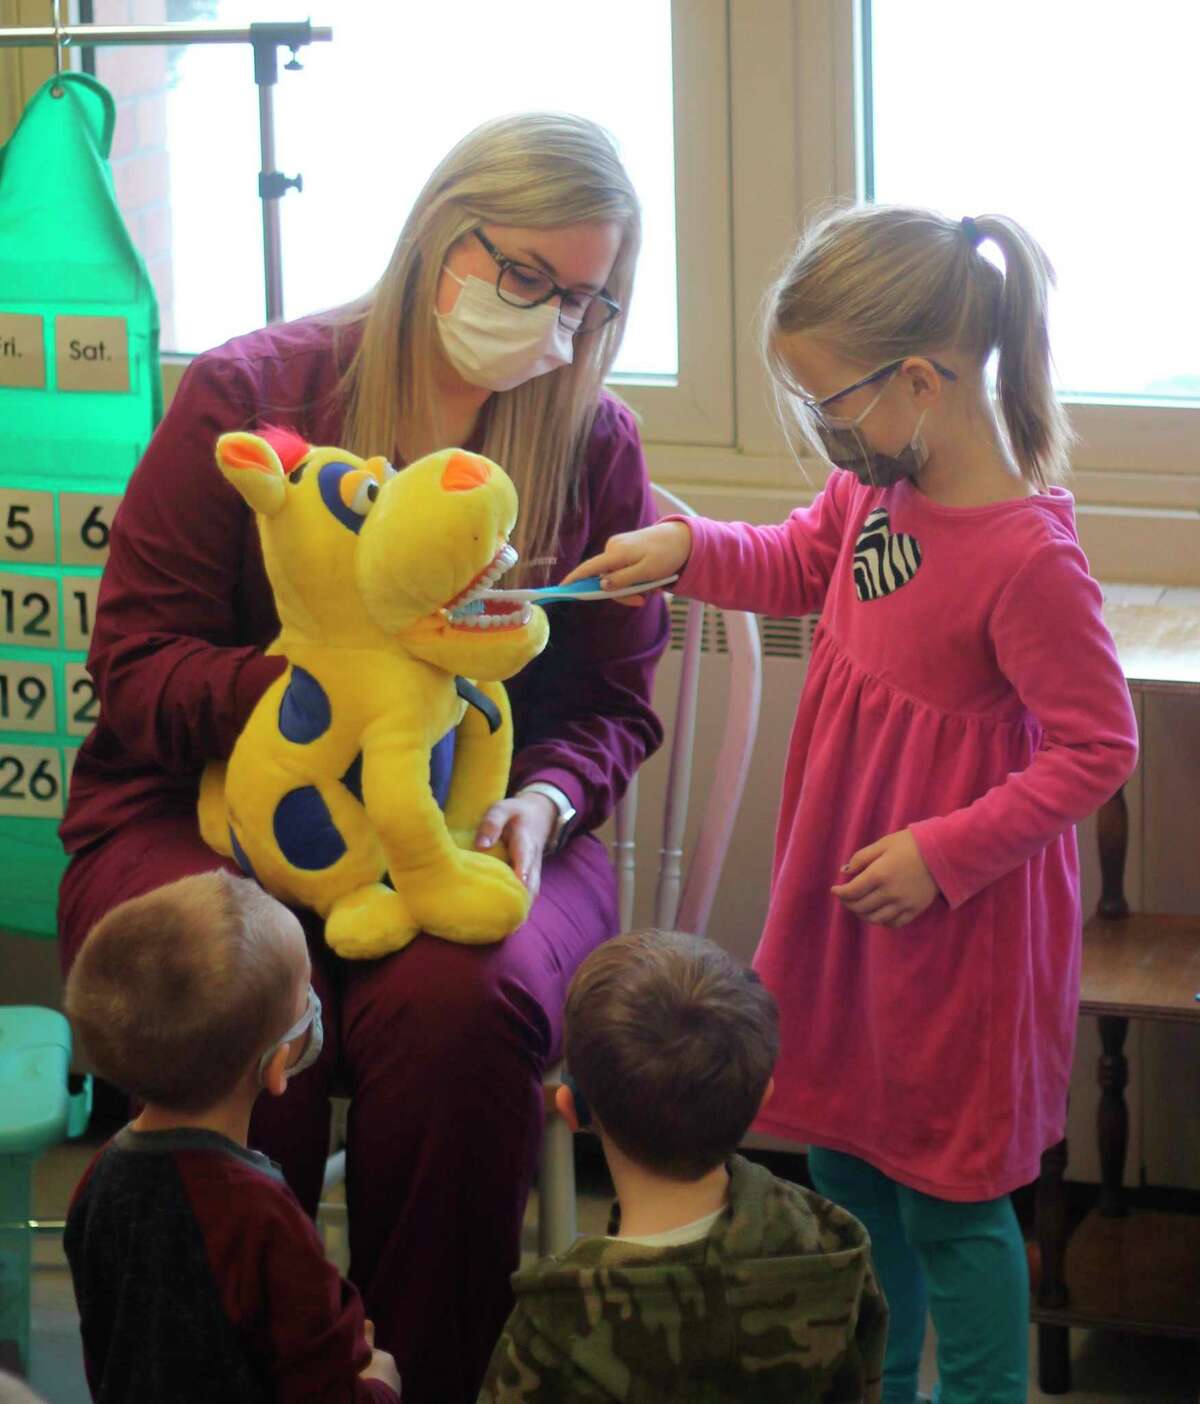 Breanna Fortin, dental hygienist of Boyer Family Dentistry, visited Trinity Lutheran School to give a presentation to preschool and kindergarten students about the importance of dental hygiene. (Kyle Kotecki/News Advocate)